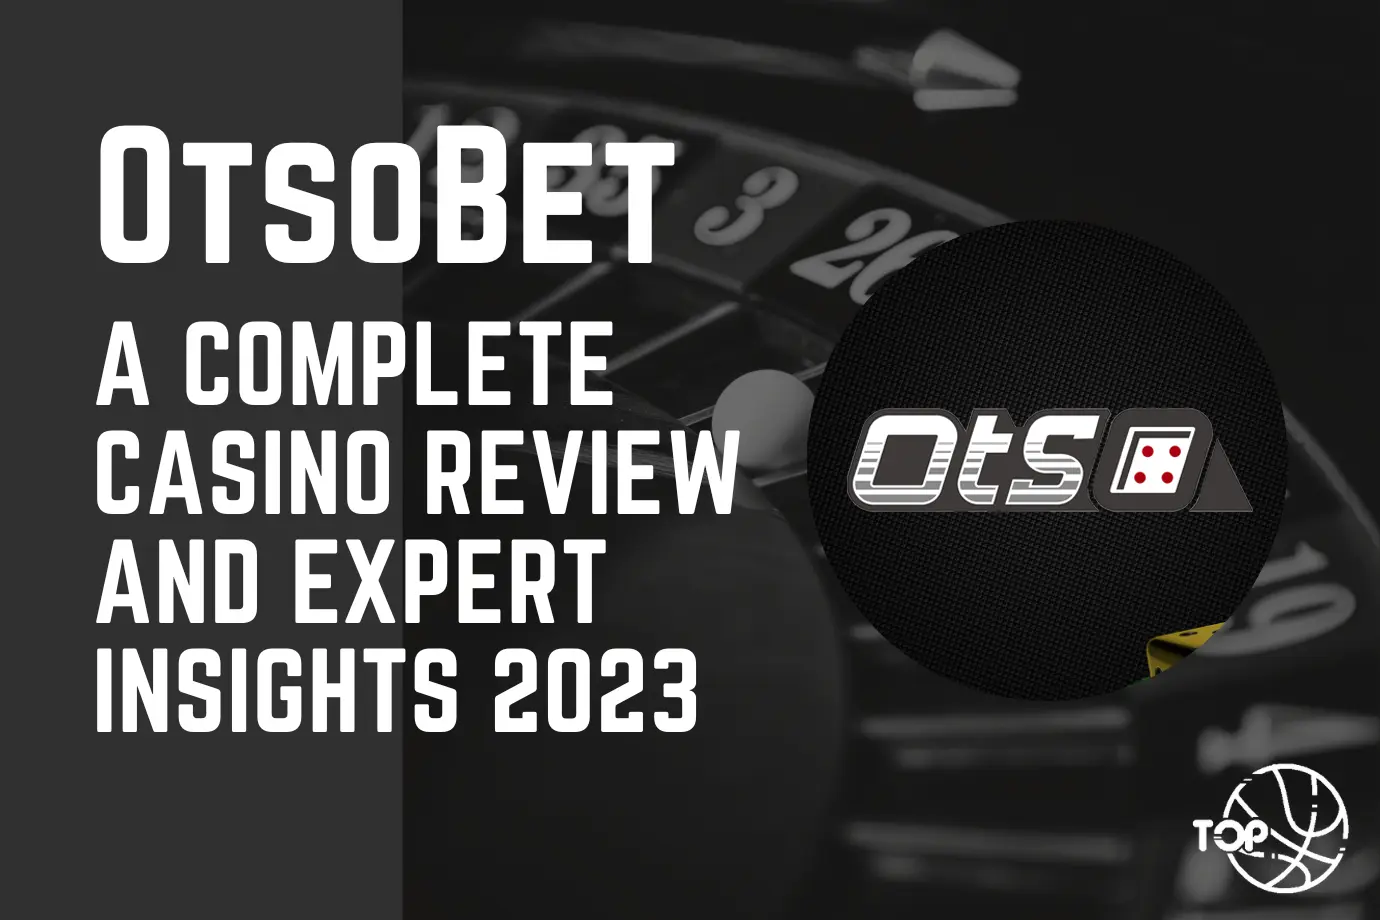 Otsobet: A Complete Casino Review and Expert Insights 2023